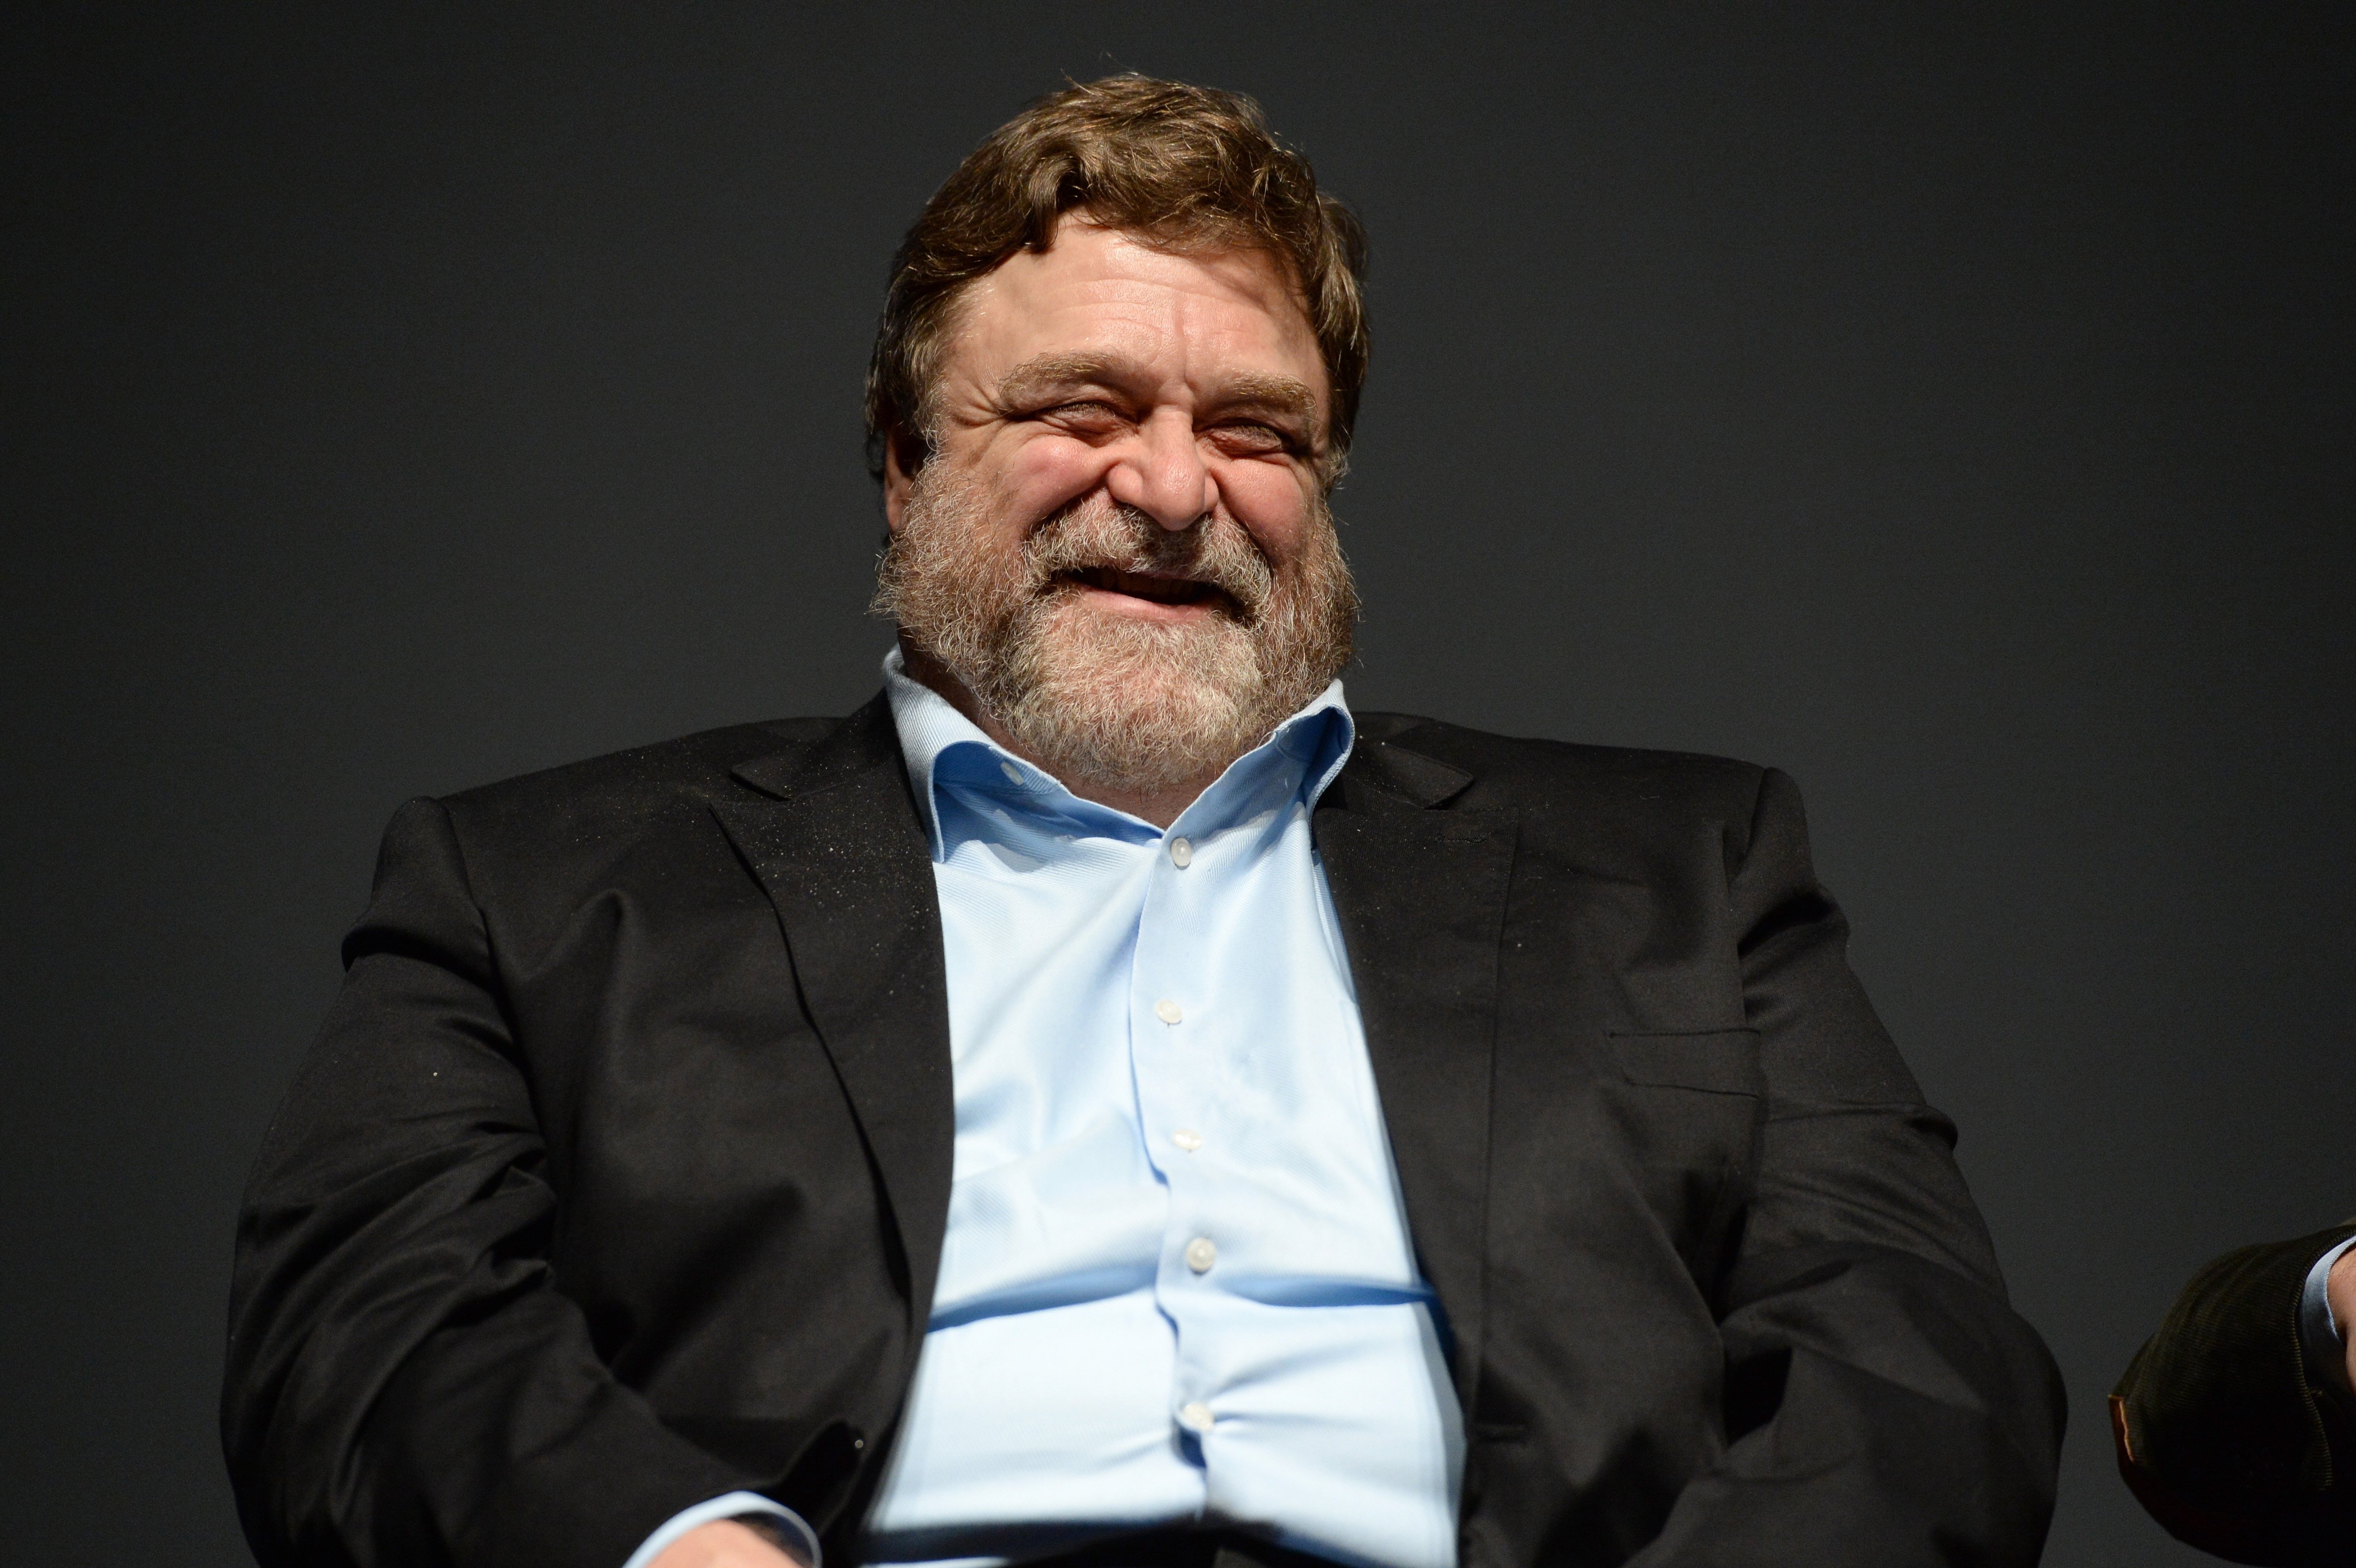 John Goodman speaks onstage at the screening of "The Gambler" in Hollywood, California on November 10, 2014 | Photo: Getty Images